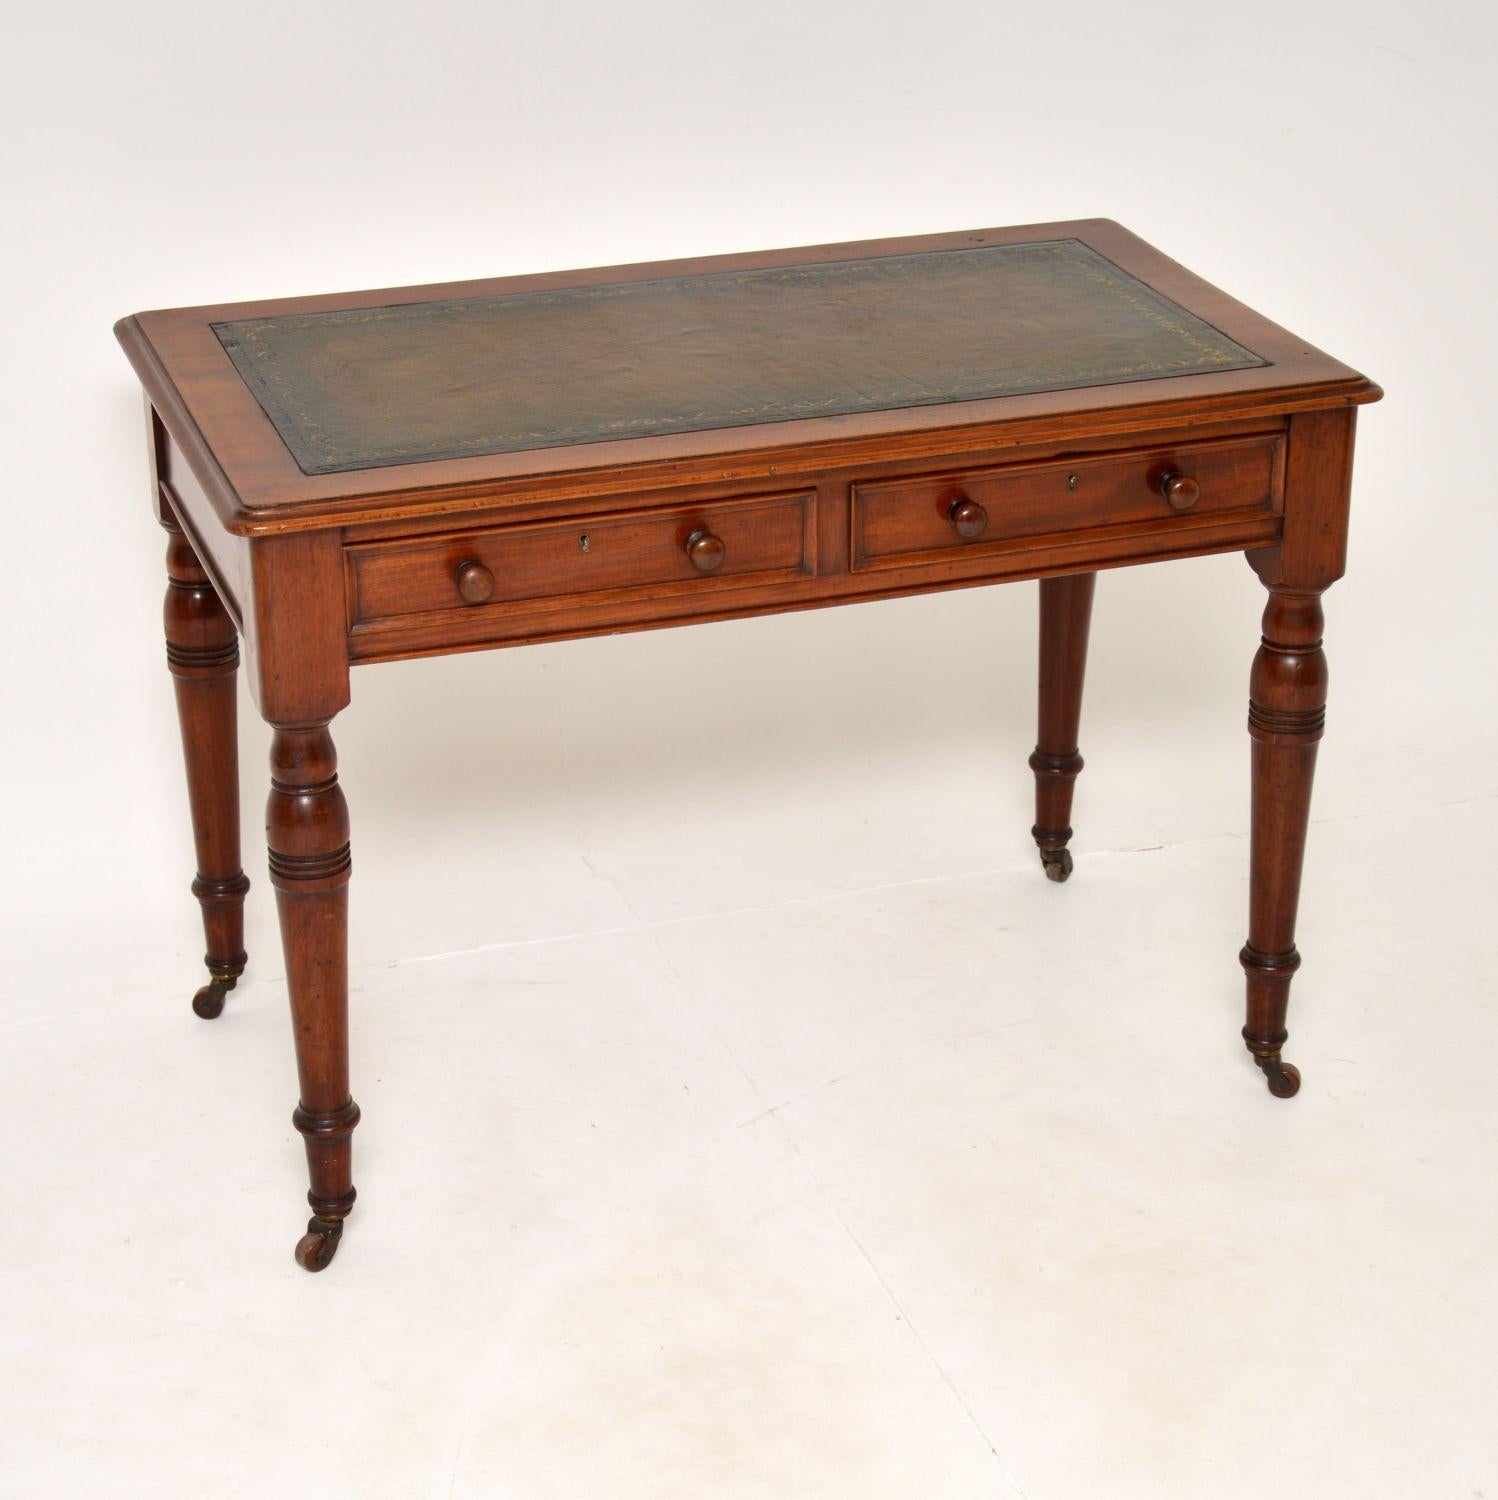 A charming and very useful original antique Victorian writing table. This was made in England, it dates from around the 1860-1880’s.

It is a great size and is beautifully finished on all sides, so can be used as a free standing item. The inset